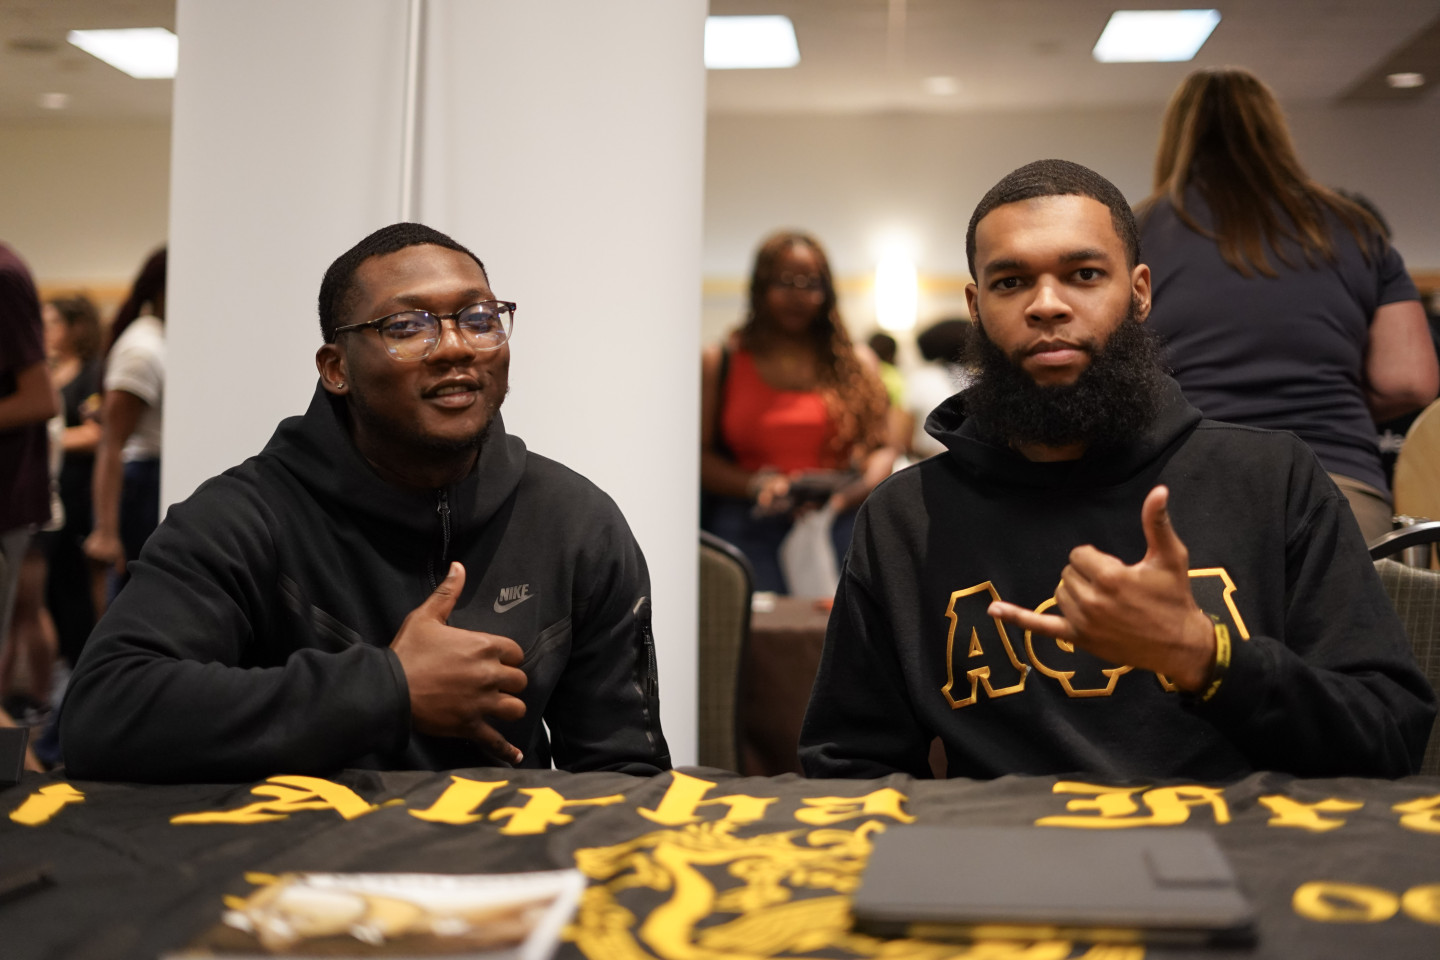 Two brothers of Alpha Phi Alpha sit at a table during an event at Western.